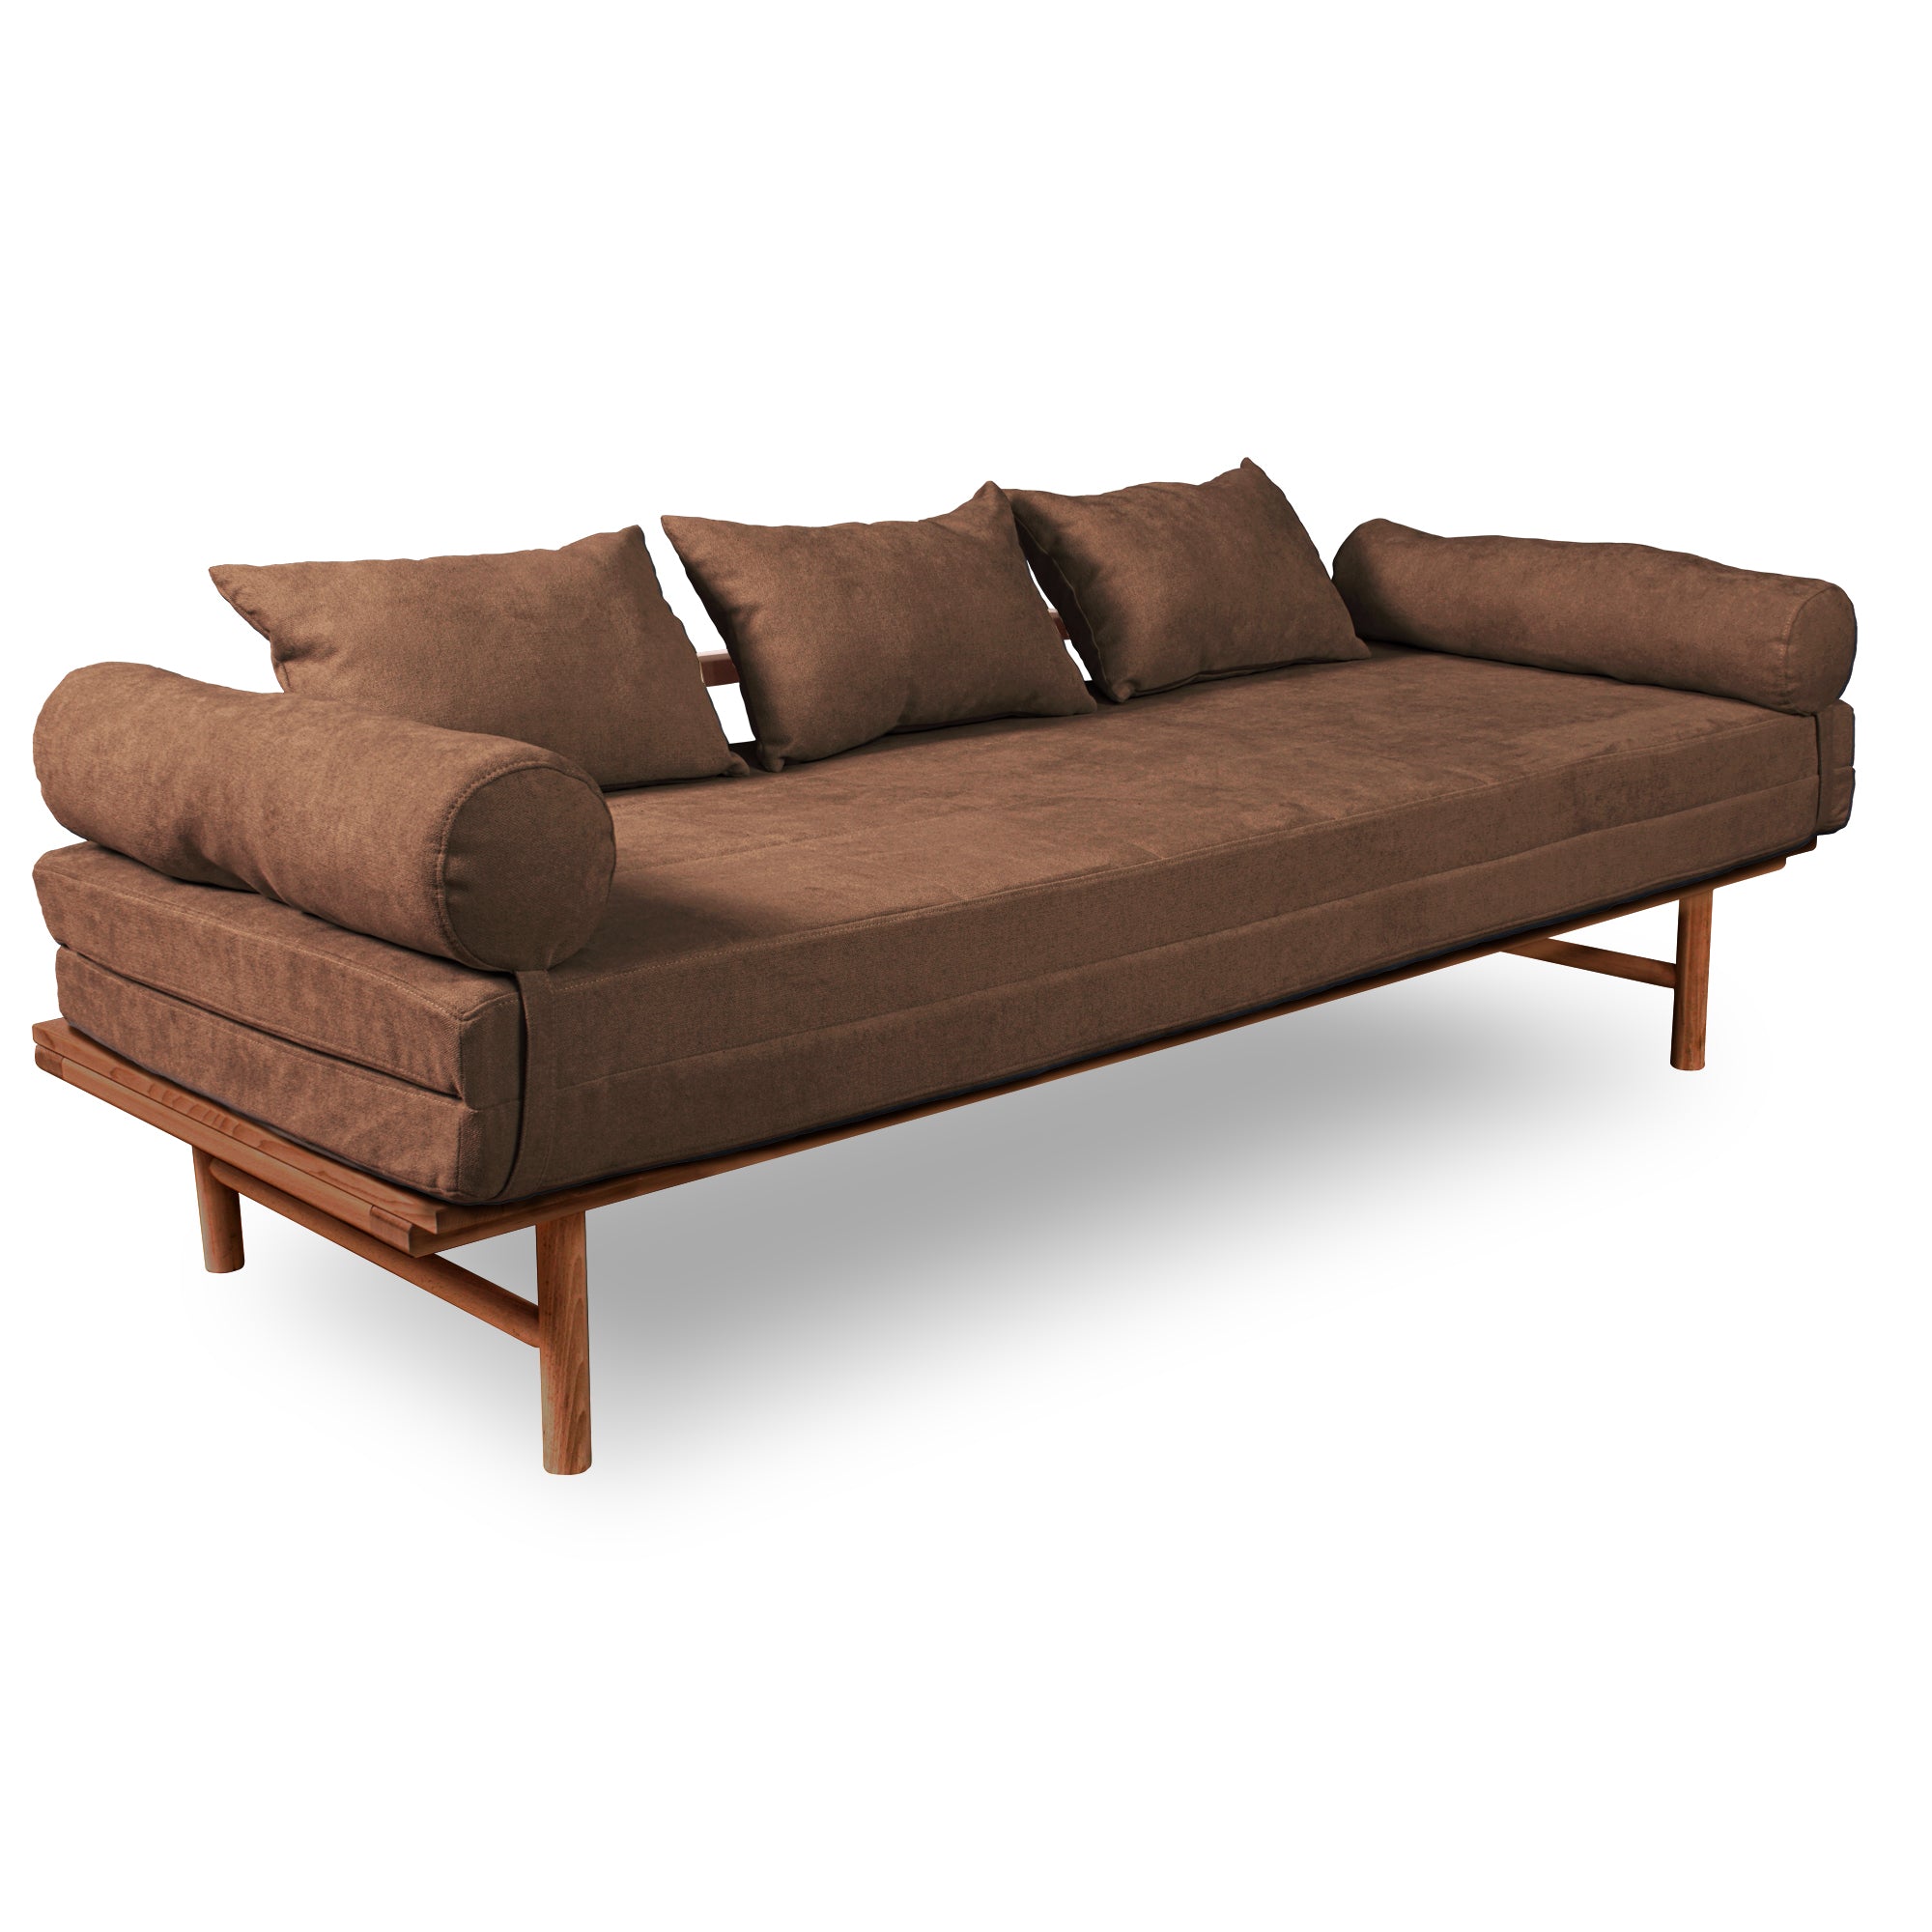 Le MAR Folding Daybed, Beech Wood Frame, Caramel Colour-brown upholstery